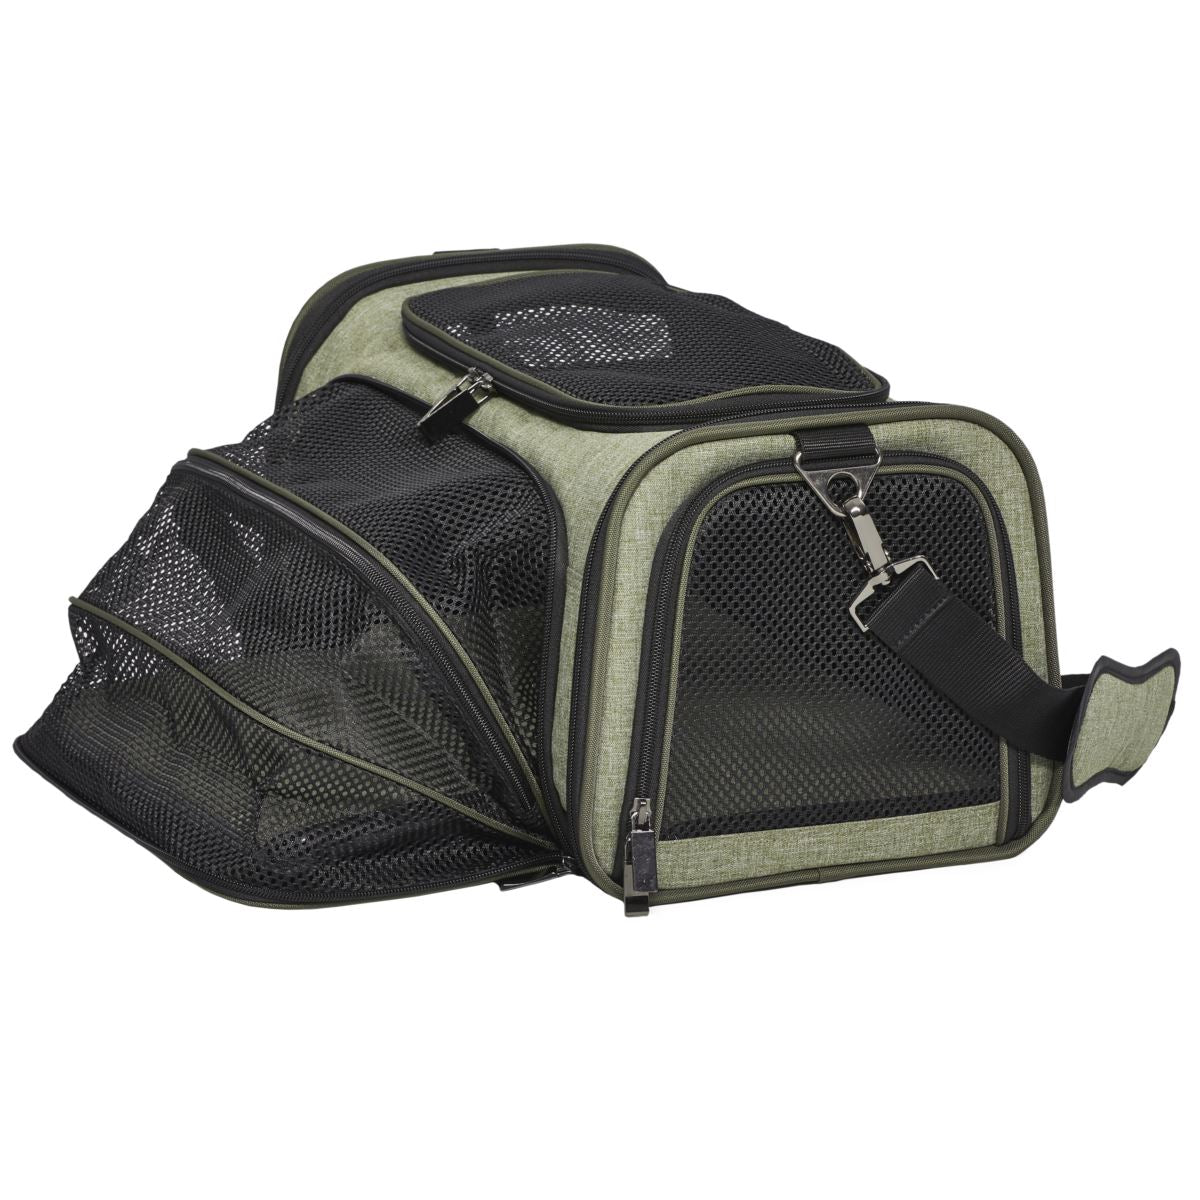 Midwest Duffy Pet Carrier Green - Mutts & Co.